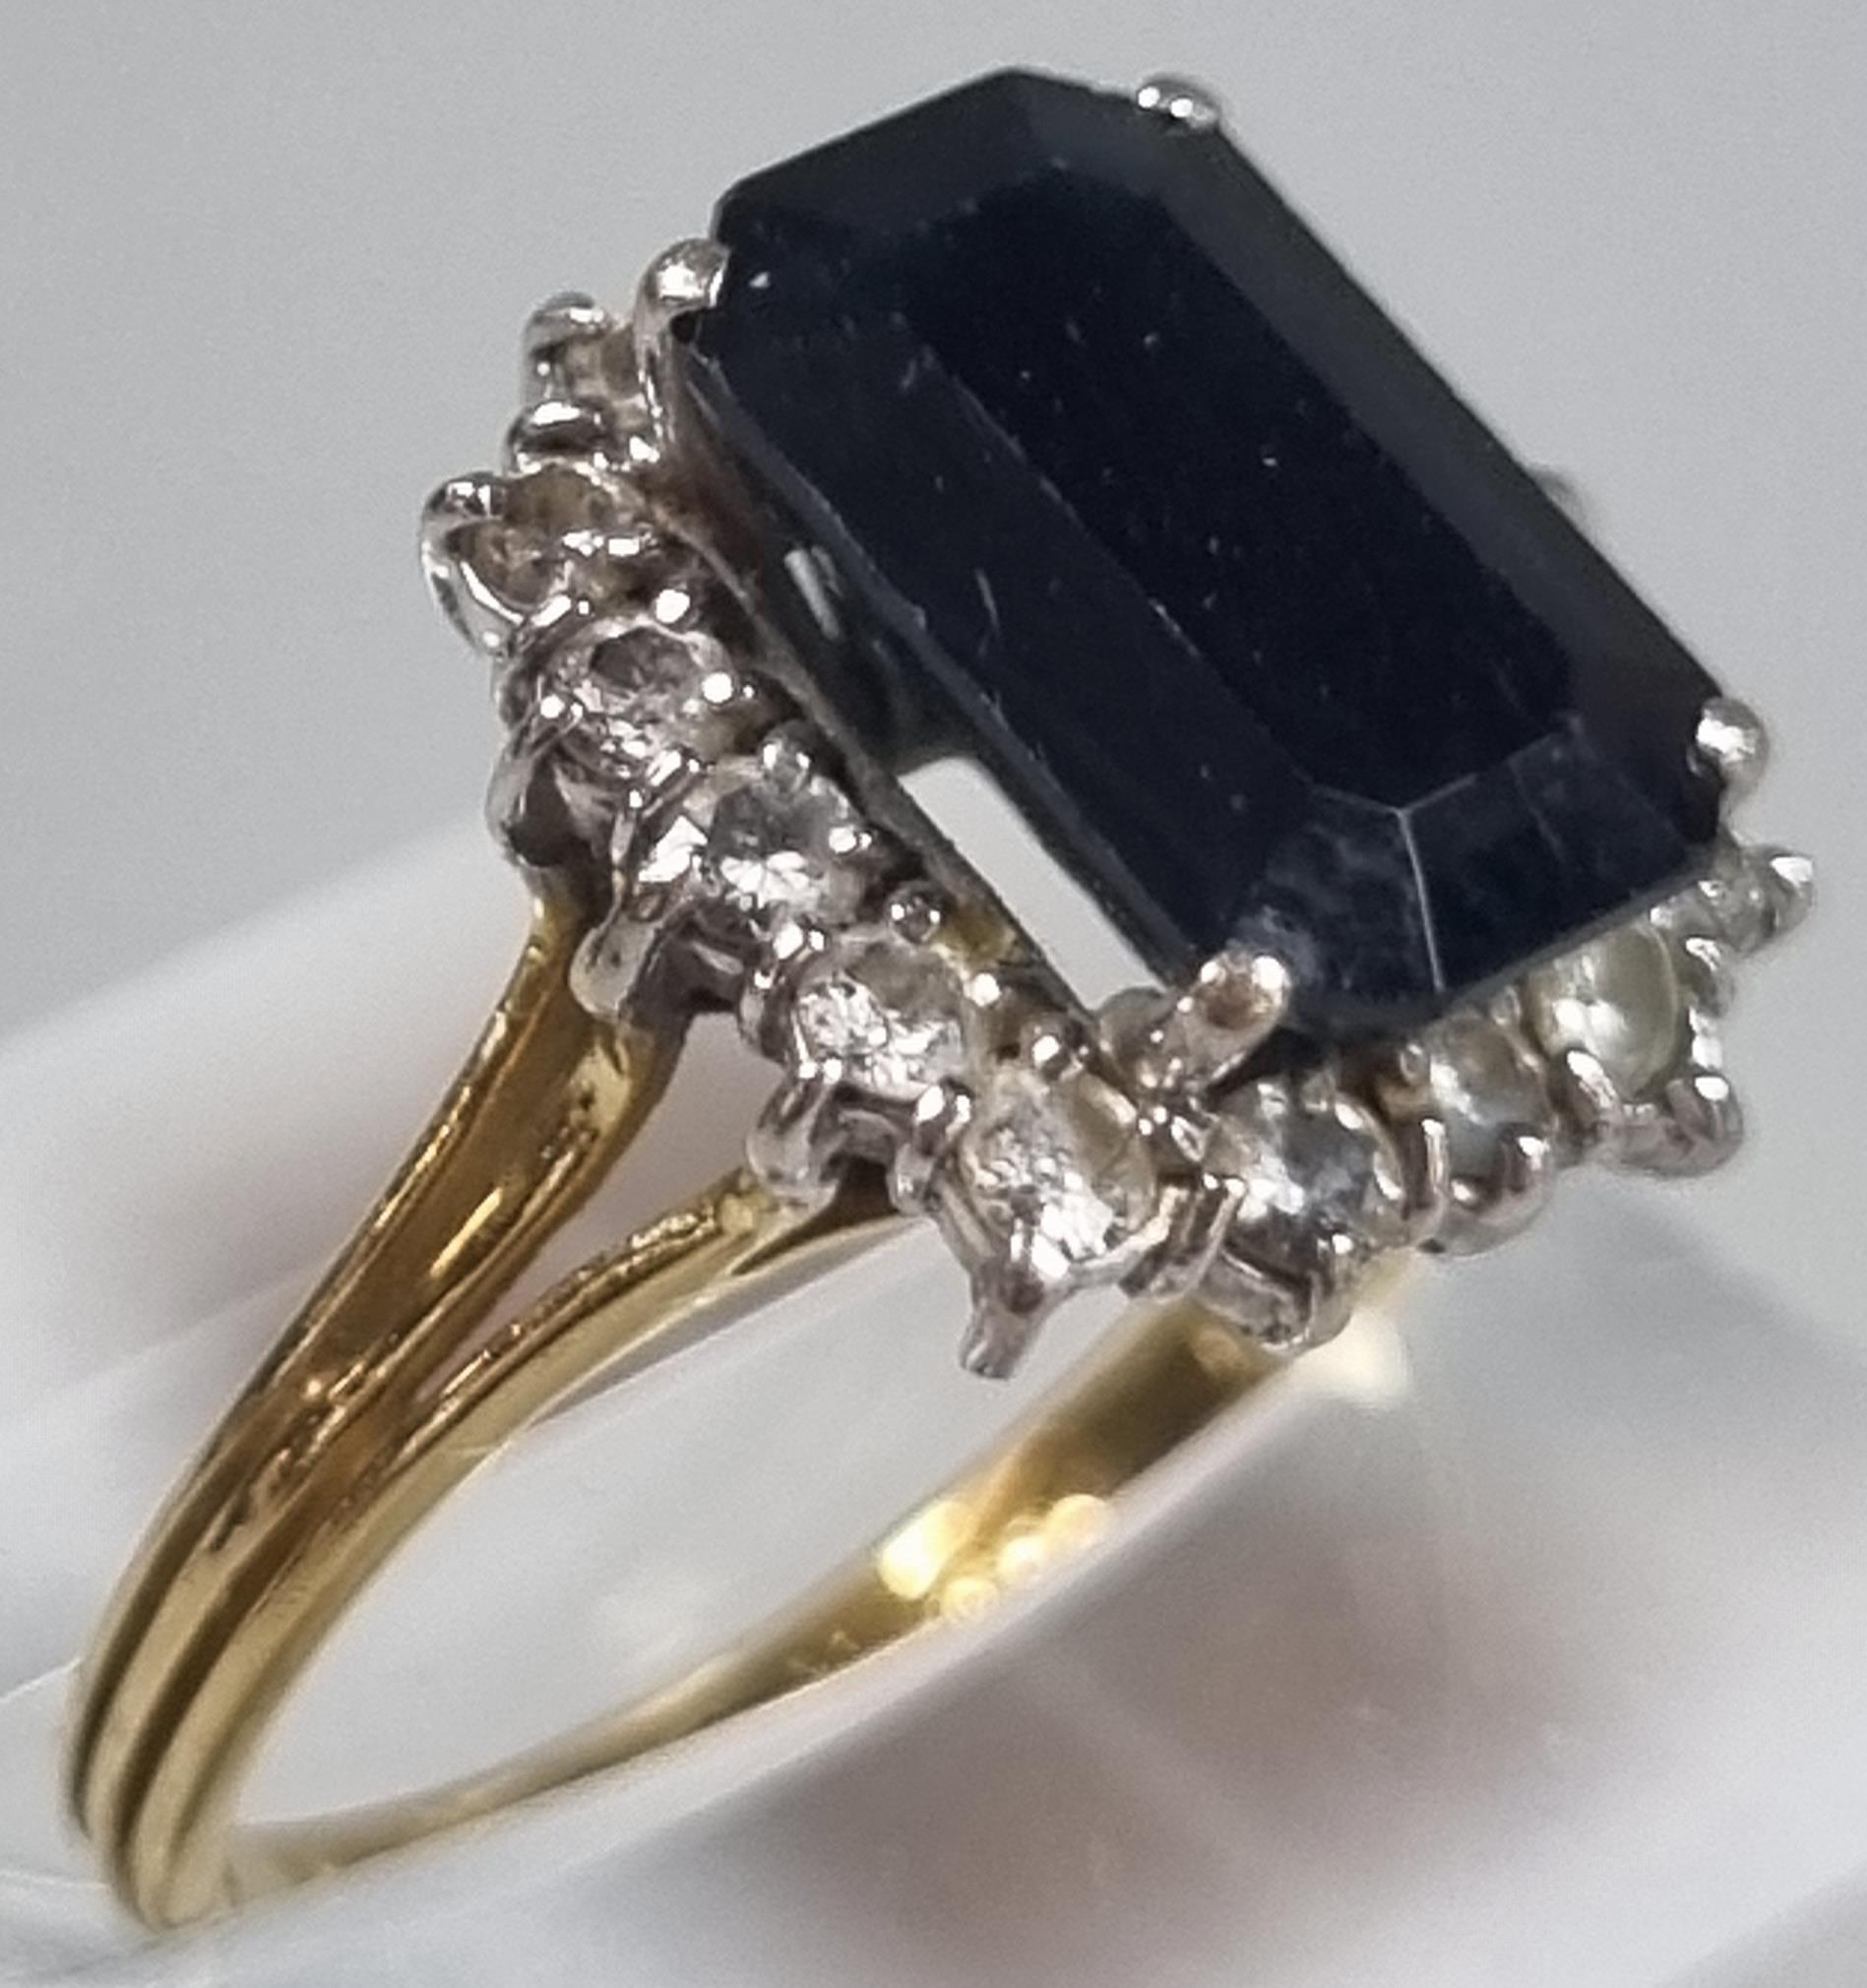 18ct gold diamond and black stone ring (possibly sapphire). 4.3g approx. Size L1/2. (B.P. 21% + VAT) - Image 3 of 5